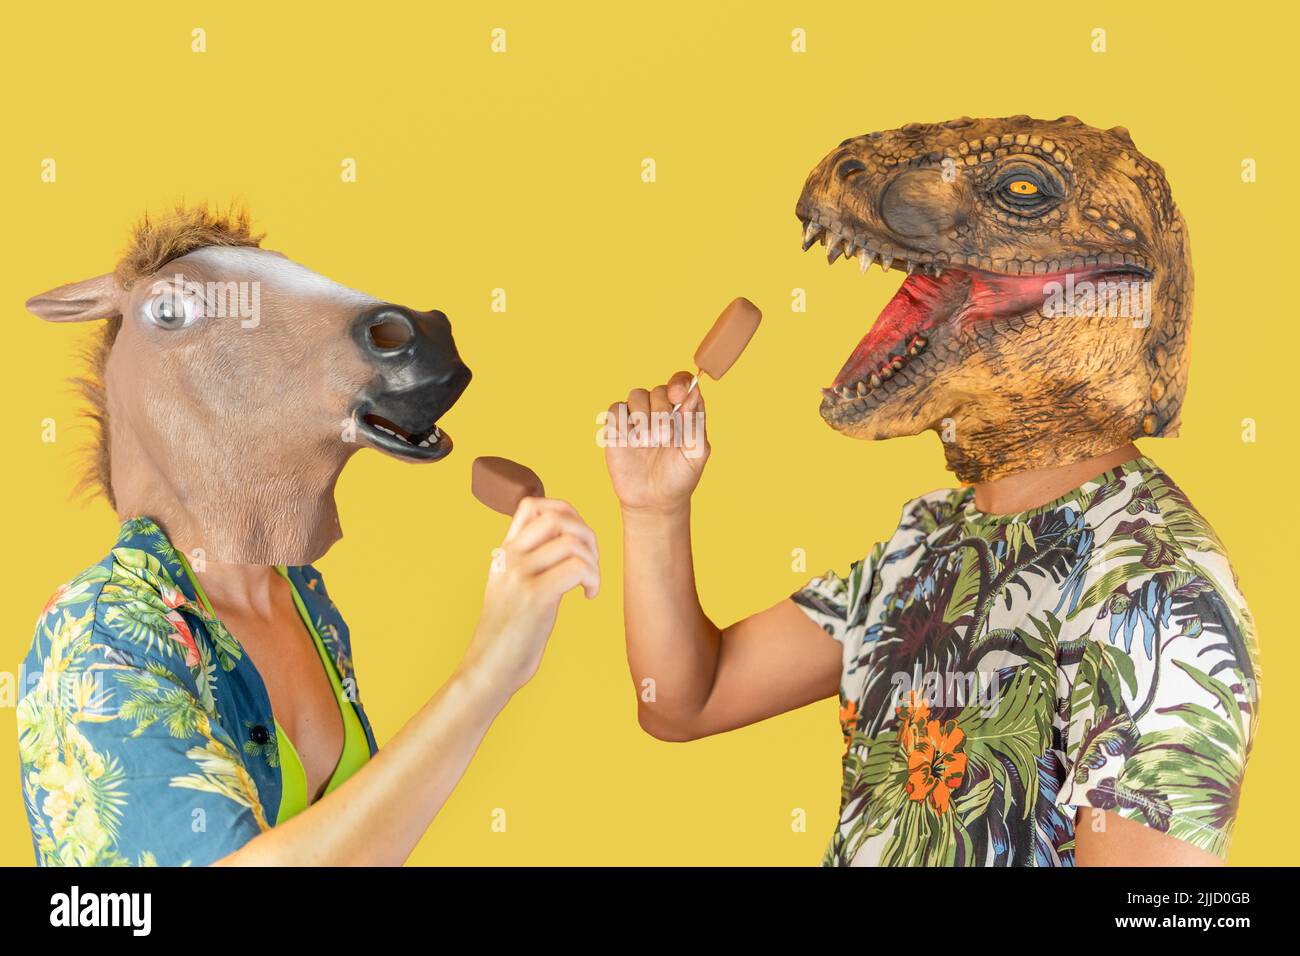 Man in dinosaur animal head mask and woman with horse head eating chocolate ice creams isolated on yellow background with copy space Stock Photo